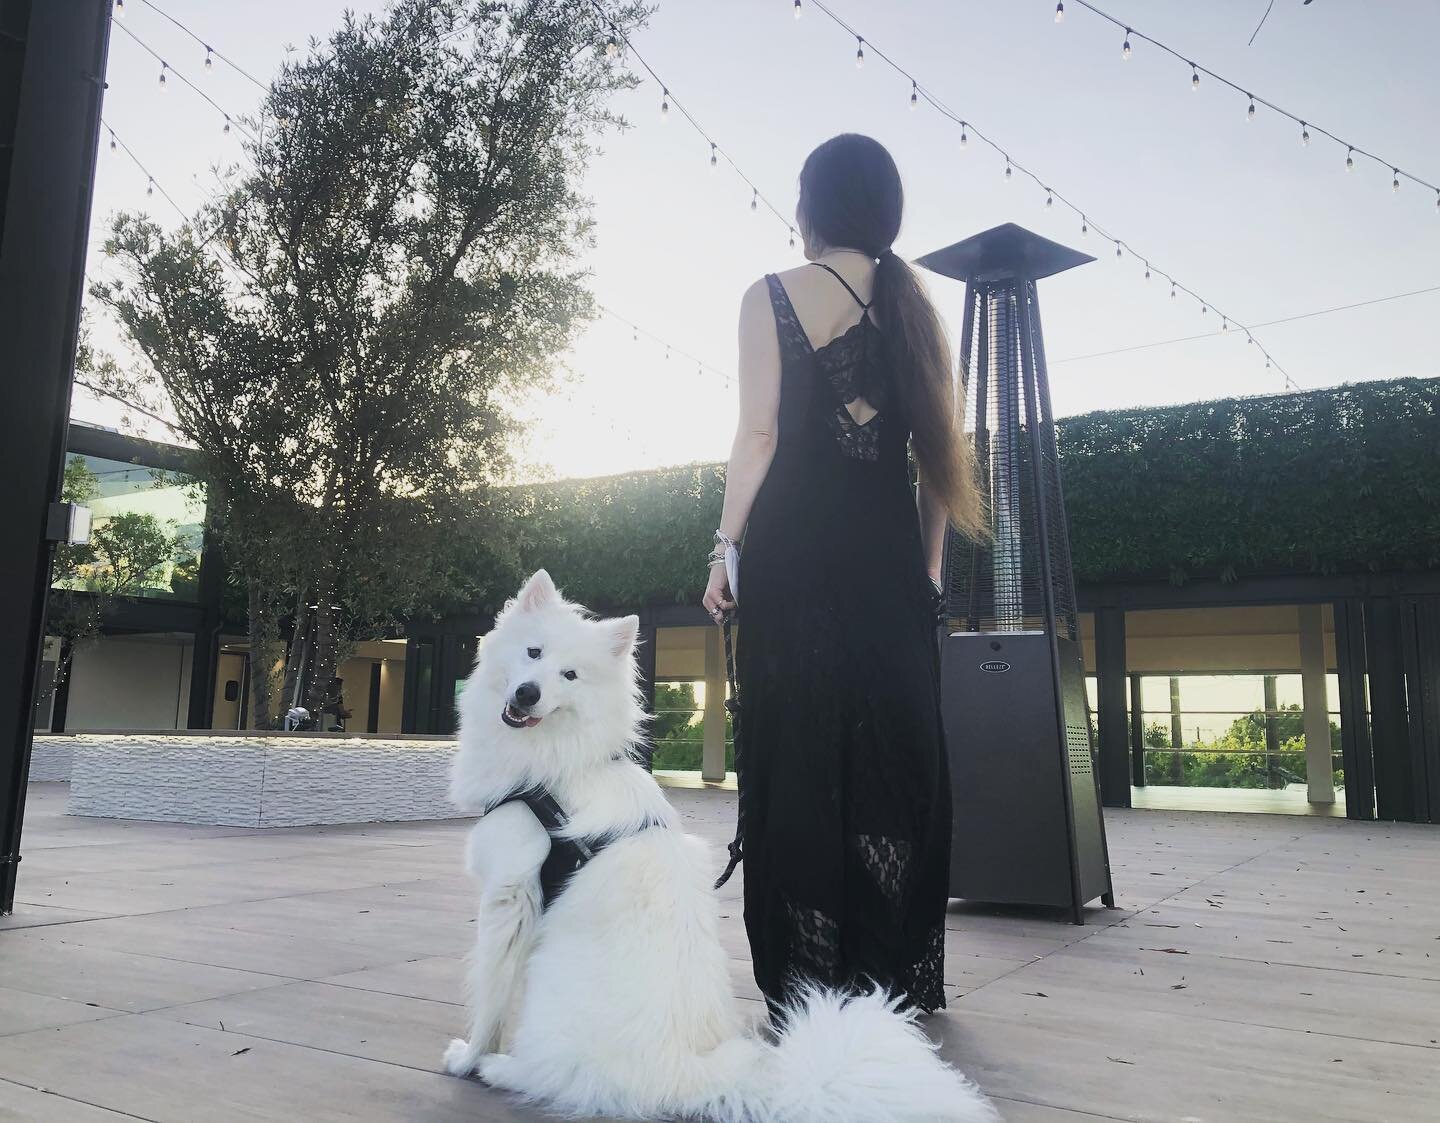 @kingsleythepuppyman  and @jennlaskey enjoying the view and wishing all our newly engaged friends best wishes.... q3 and q4 2021 are looking bright for gatherings with the safety and normalcy we all so dearly miss.... pls keep the new Palm Sophia roo